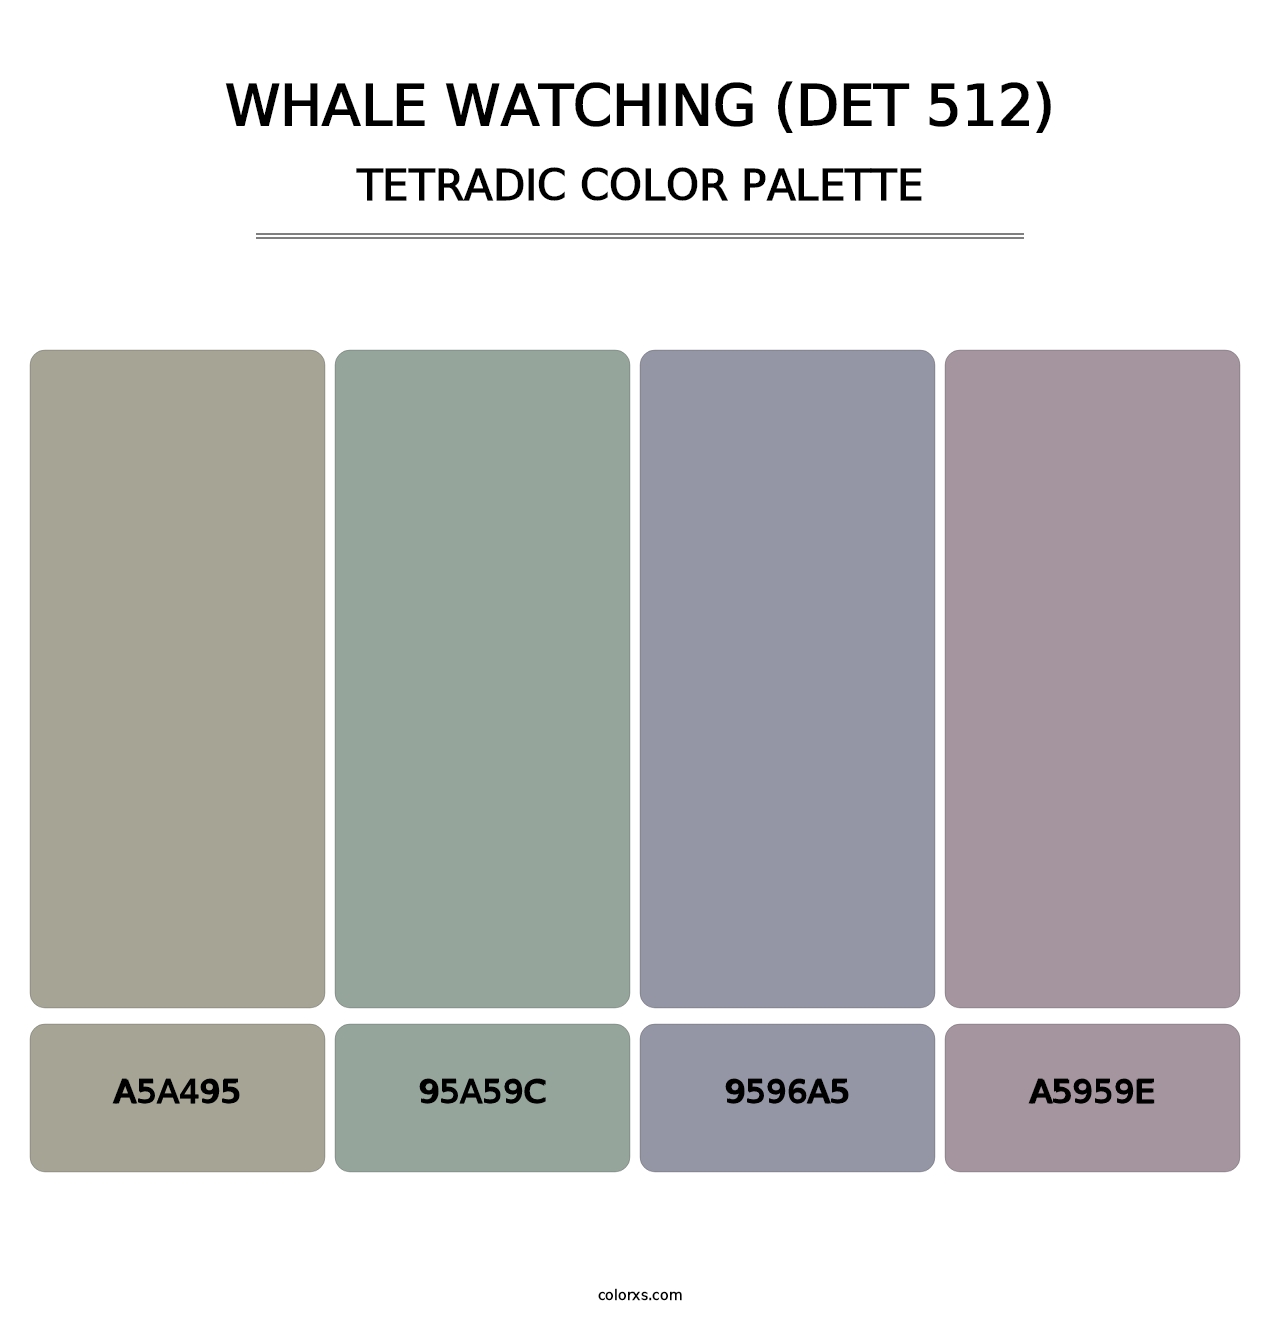 Whale Watching (DET 512) - Tetradic Color Palette